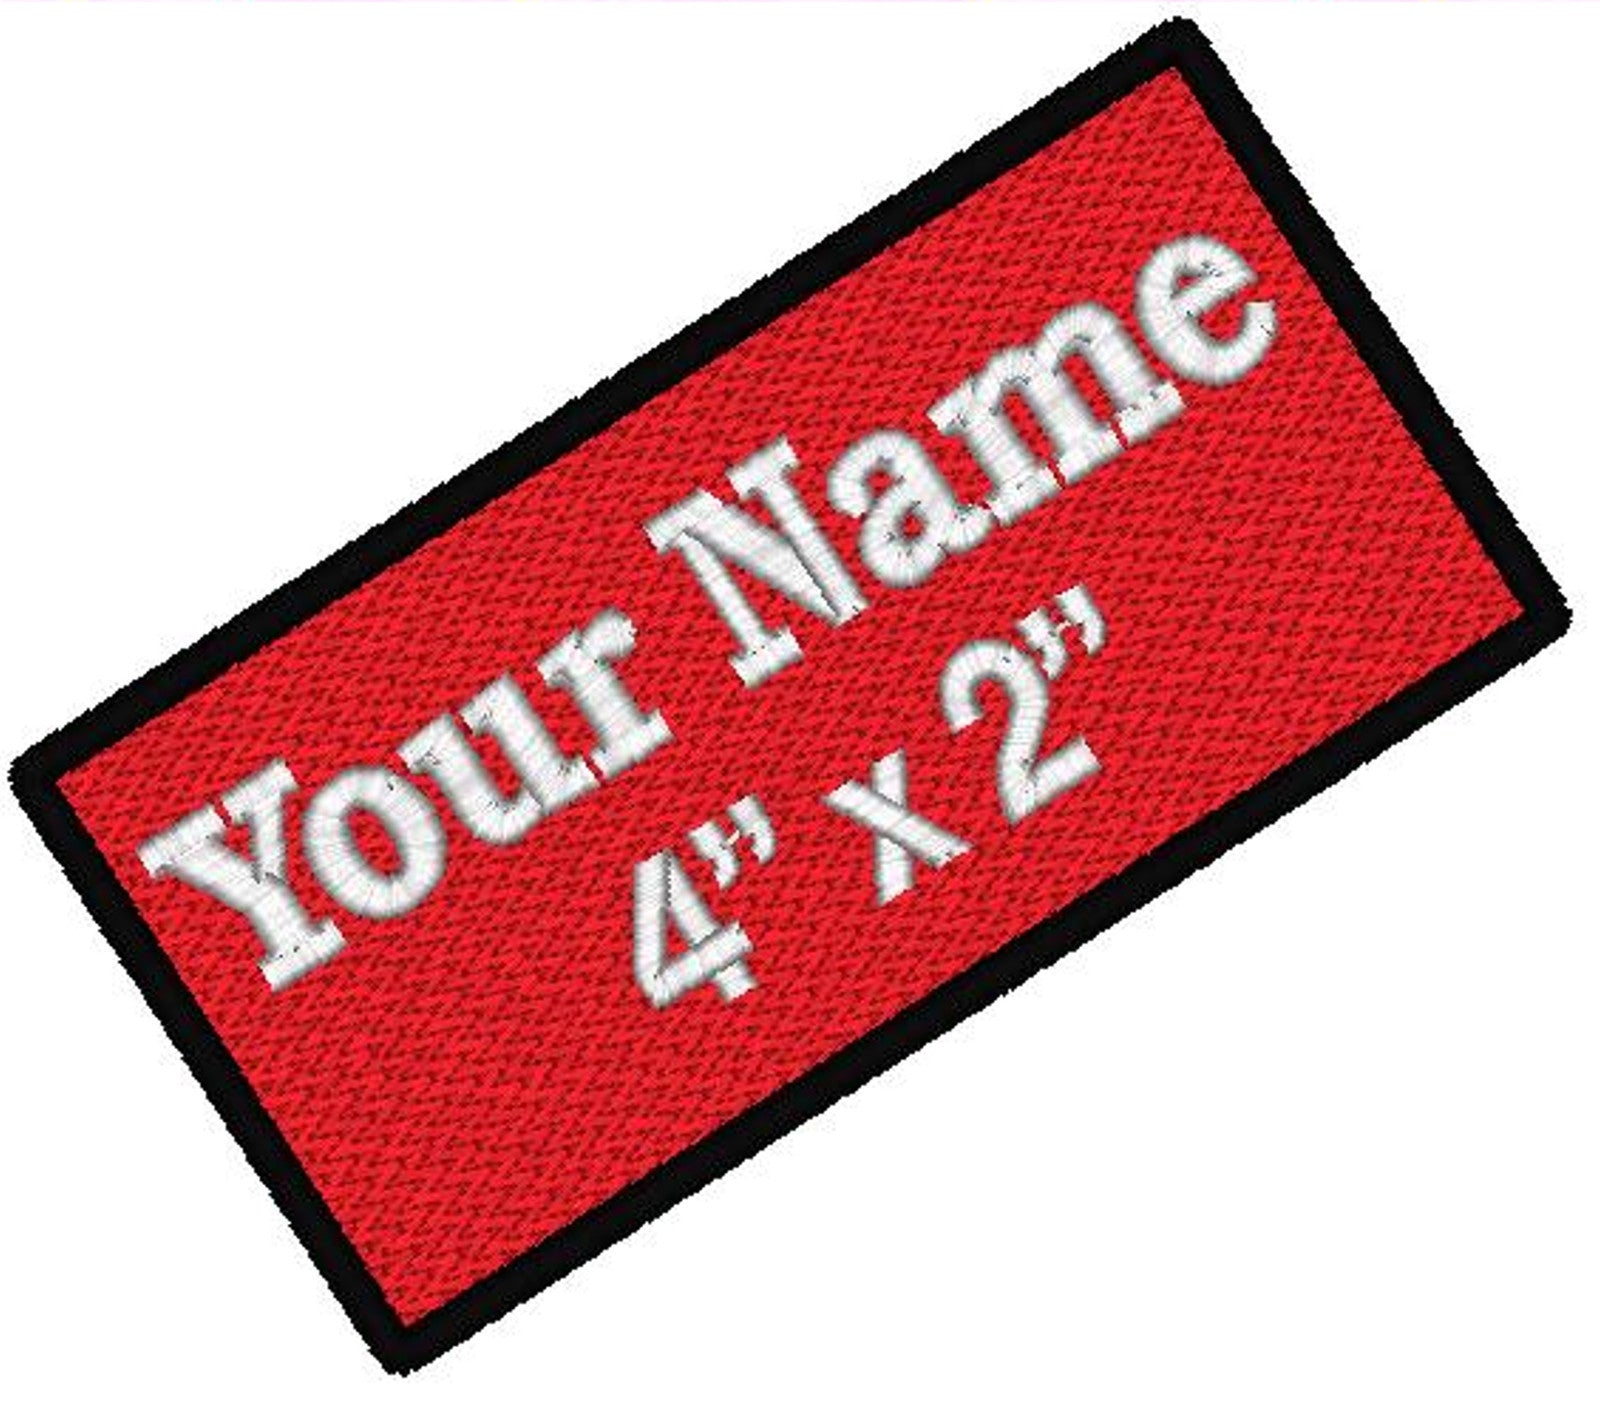 Embroidered Name Patch, Embroidered Name Tag Patch, Iron On